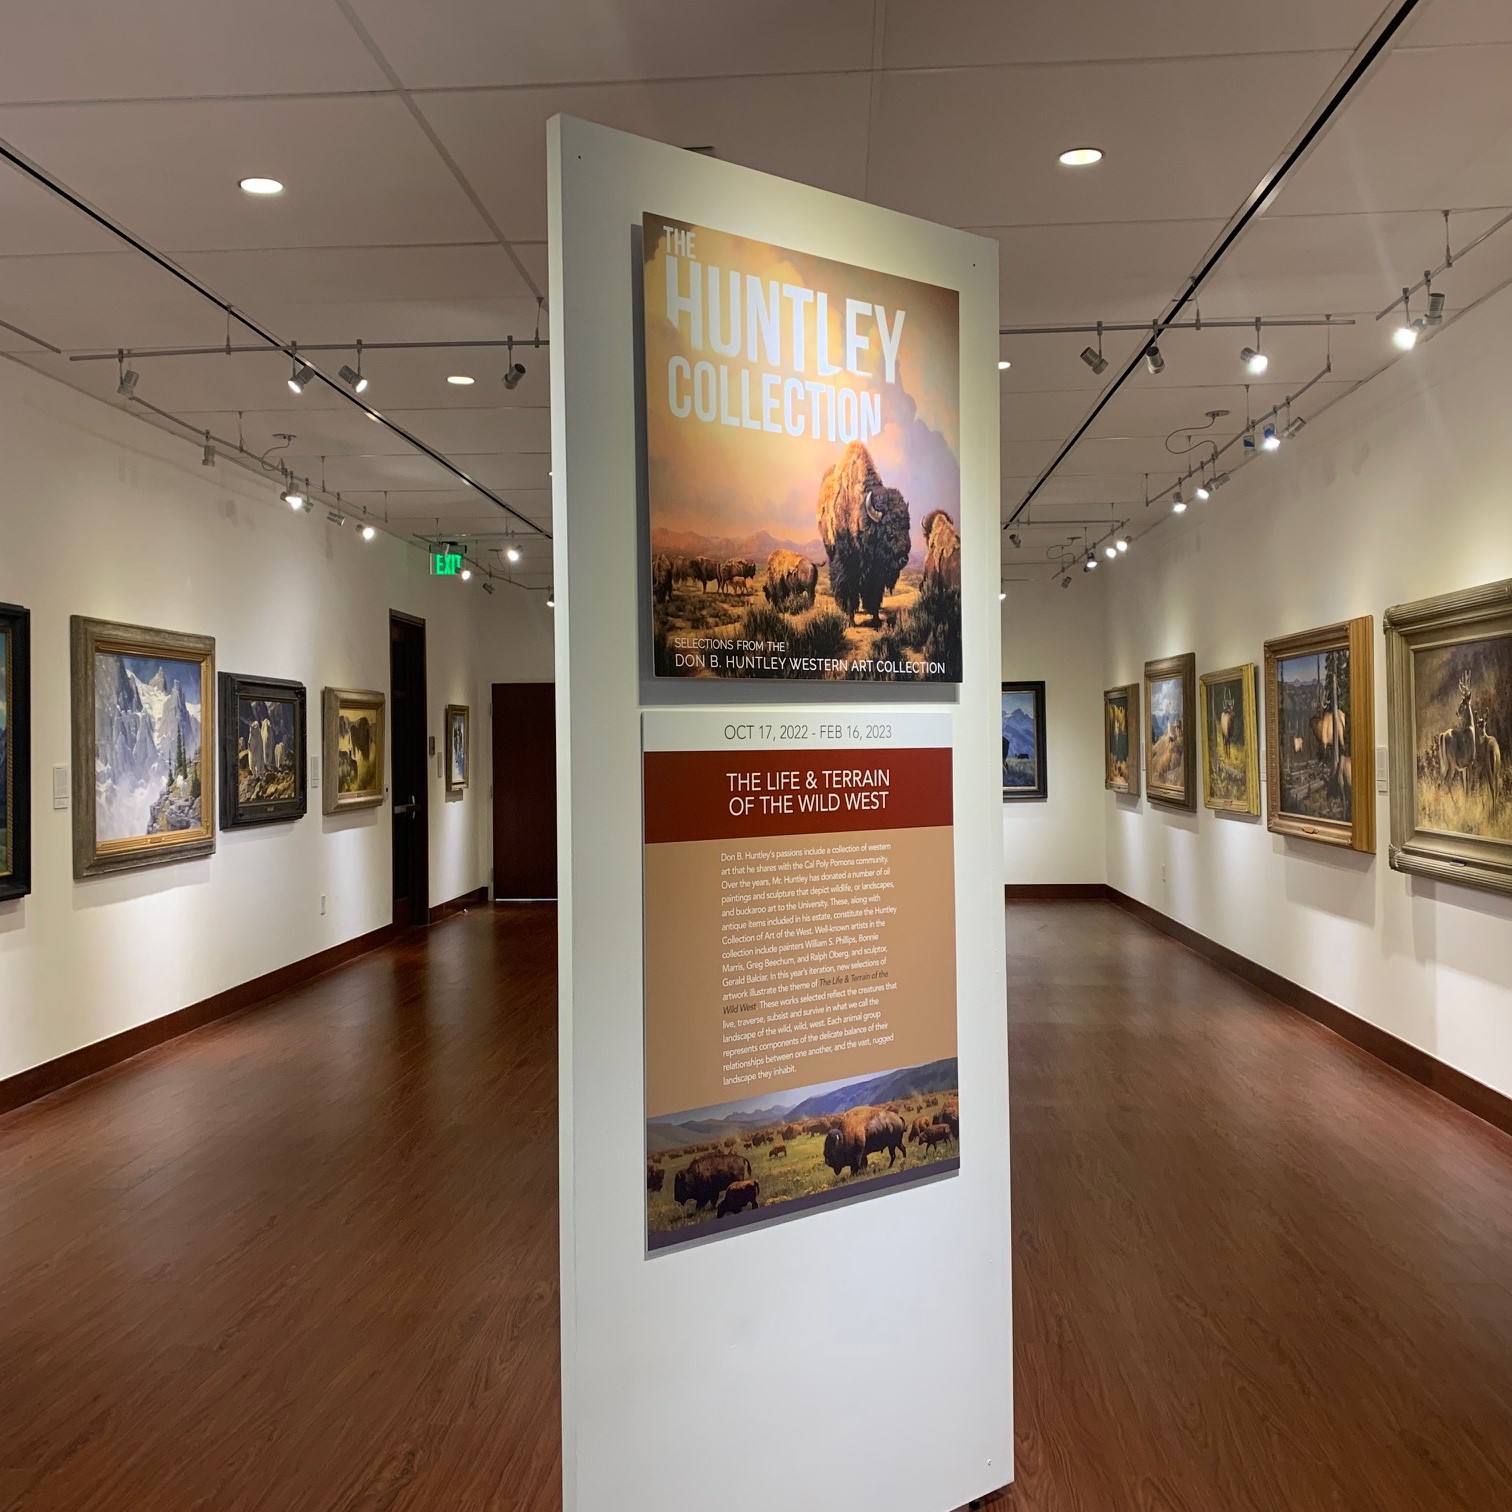 Image of the Huntley Gallery showing "The life and terrain of the wild West" text didactic and artwork